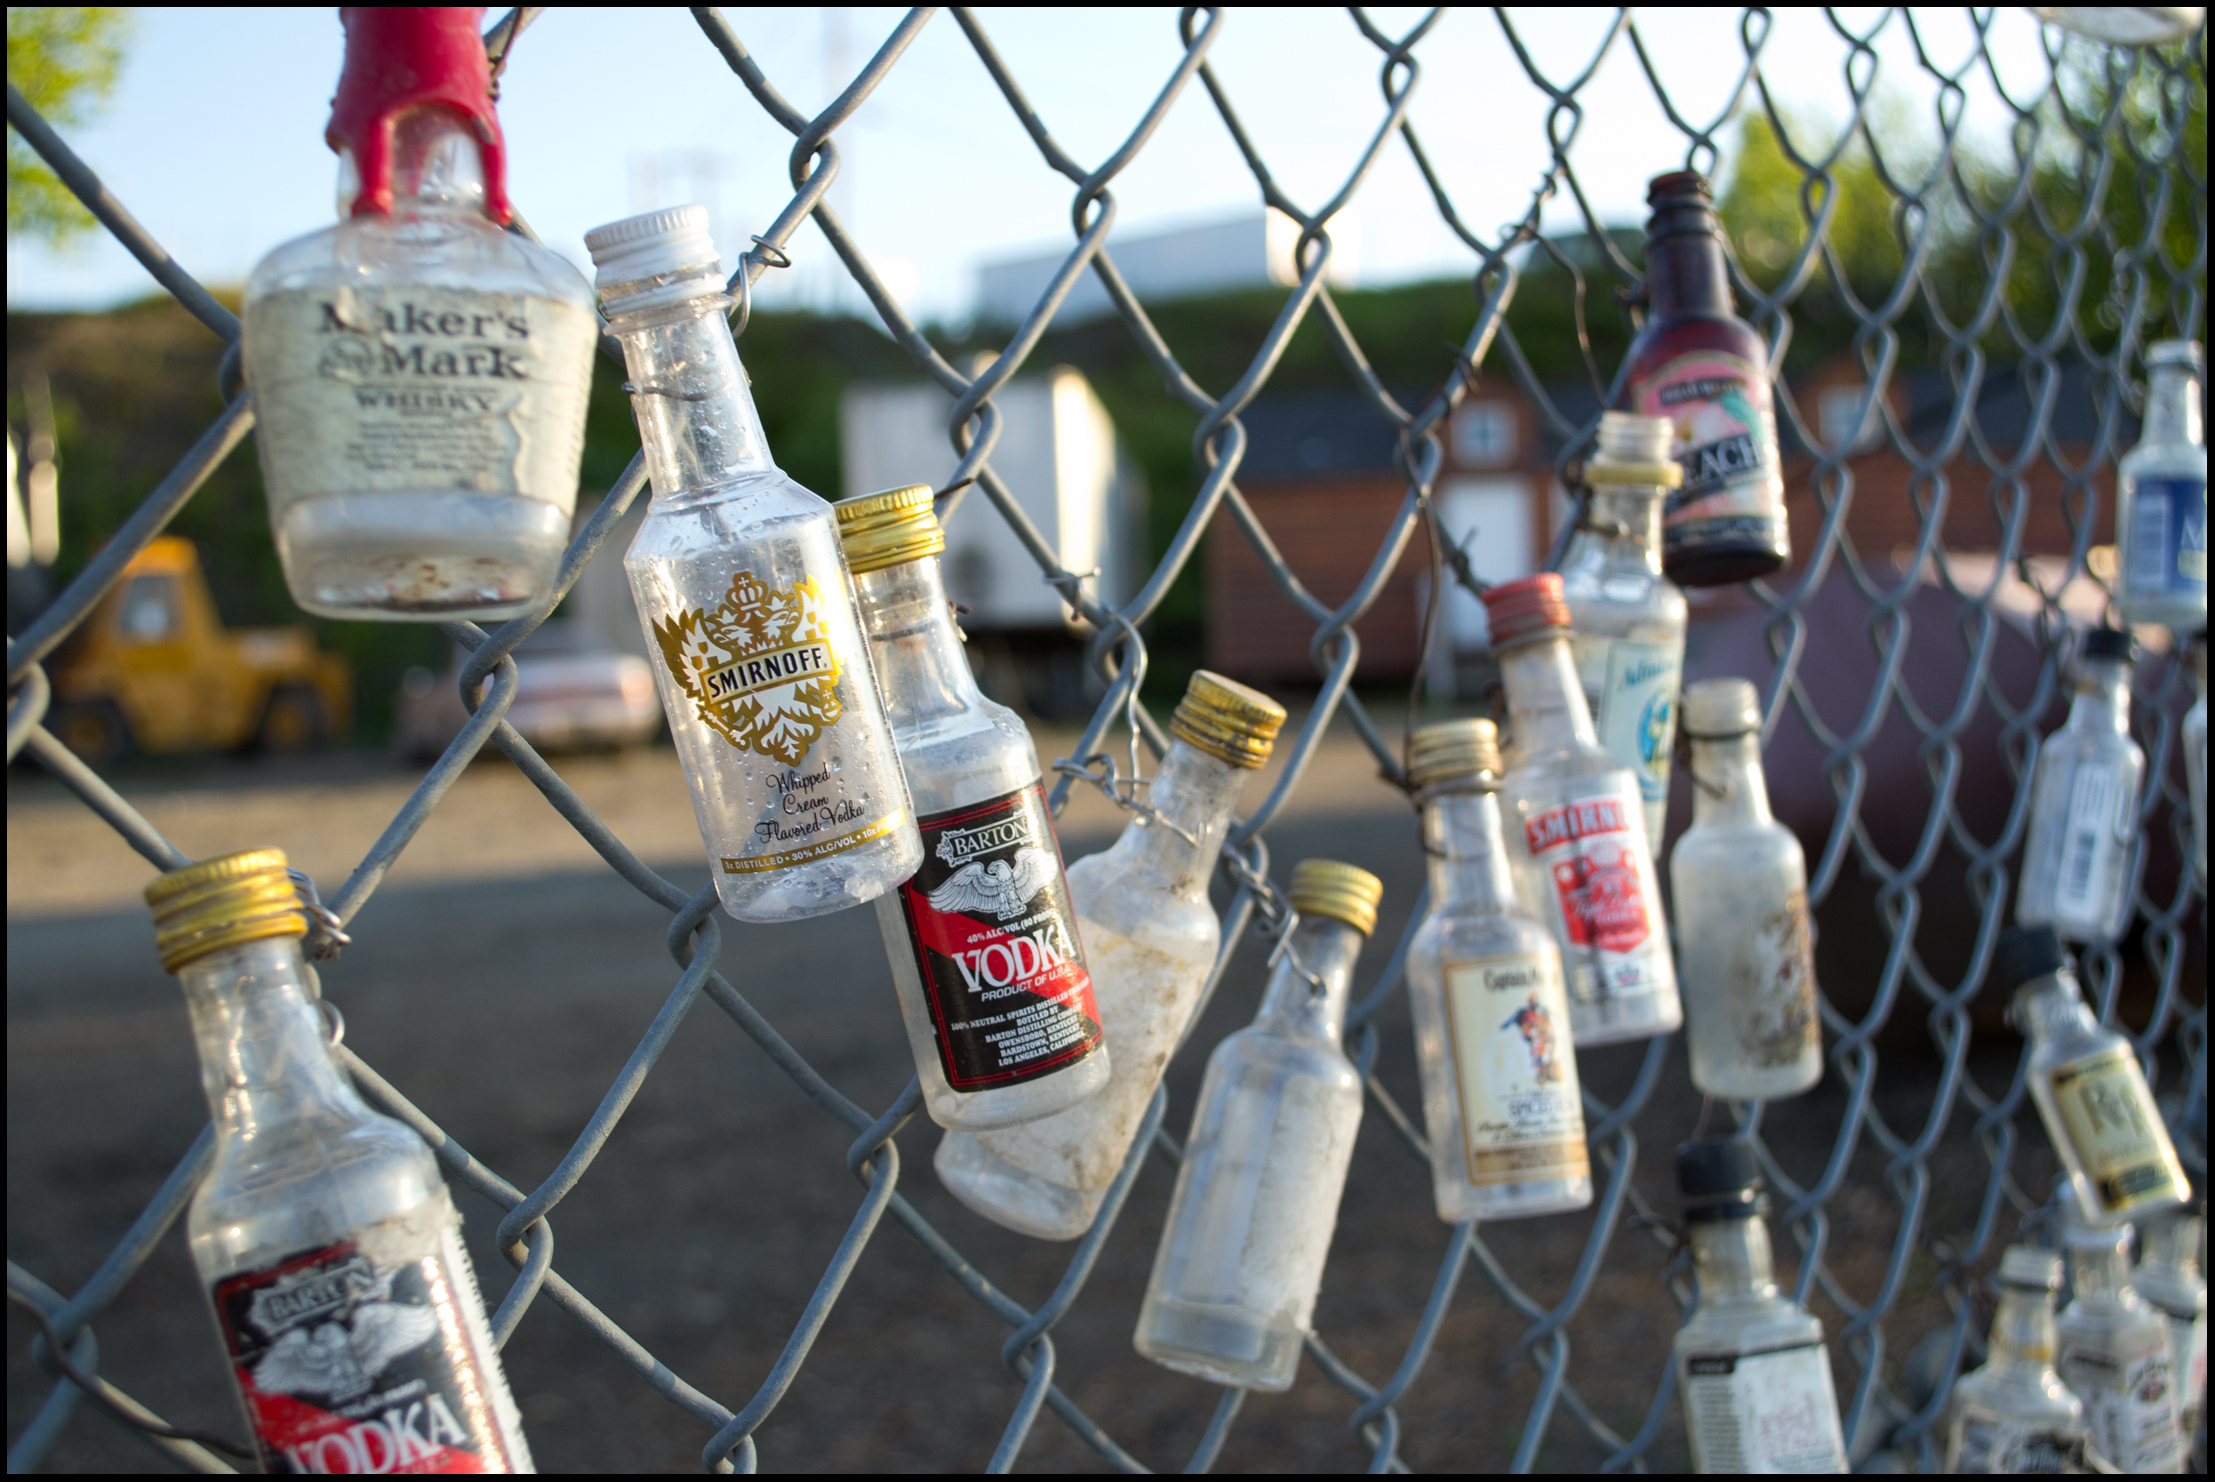 A street art project in Anchorage uses discarded liquor bottles to highlight the city's alcohol problem.Photo credit: Clark Yerrington